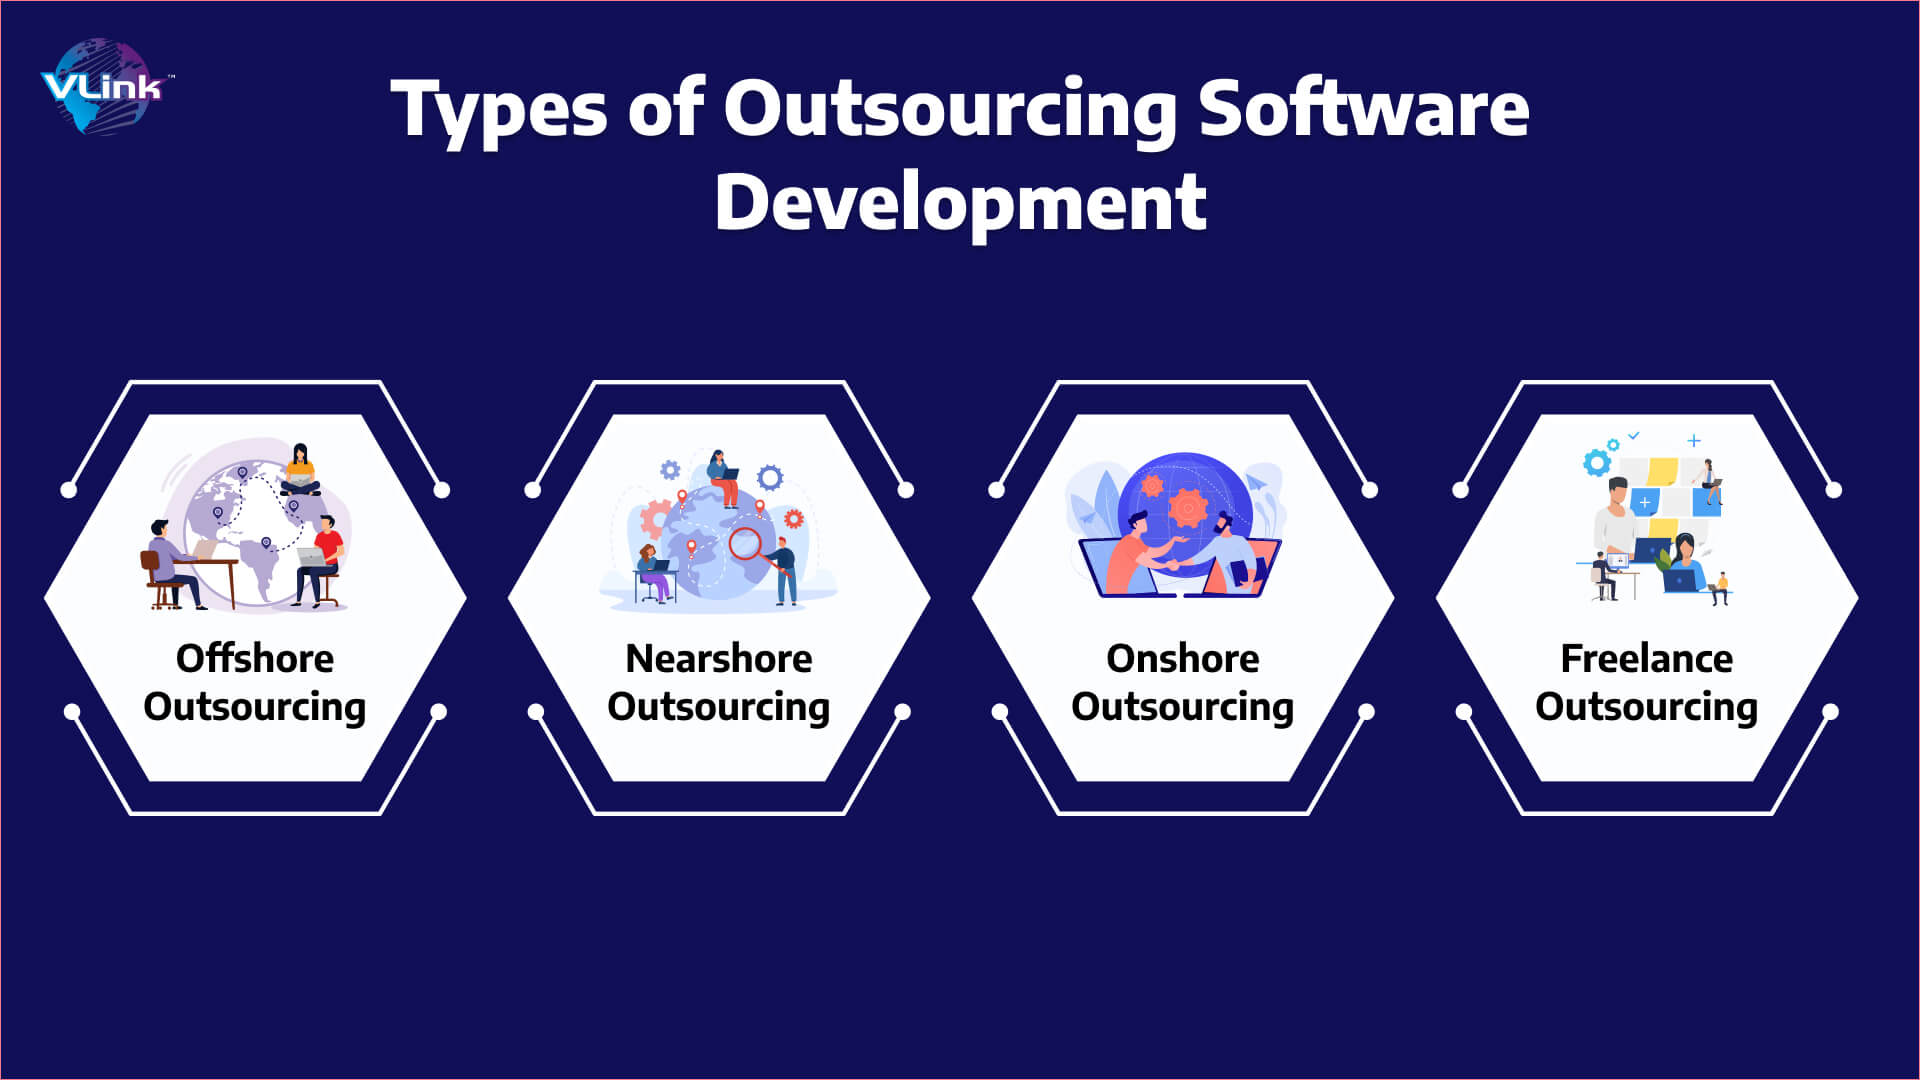 Types of Outsourcing Software Development